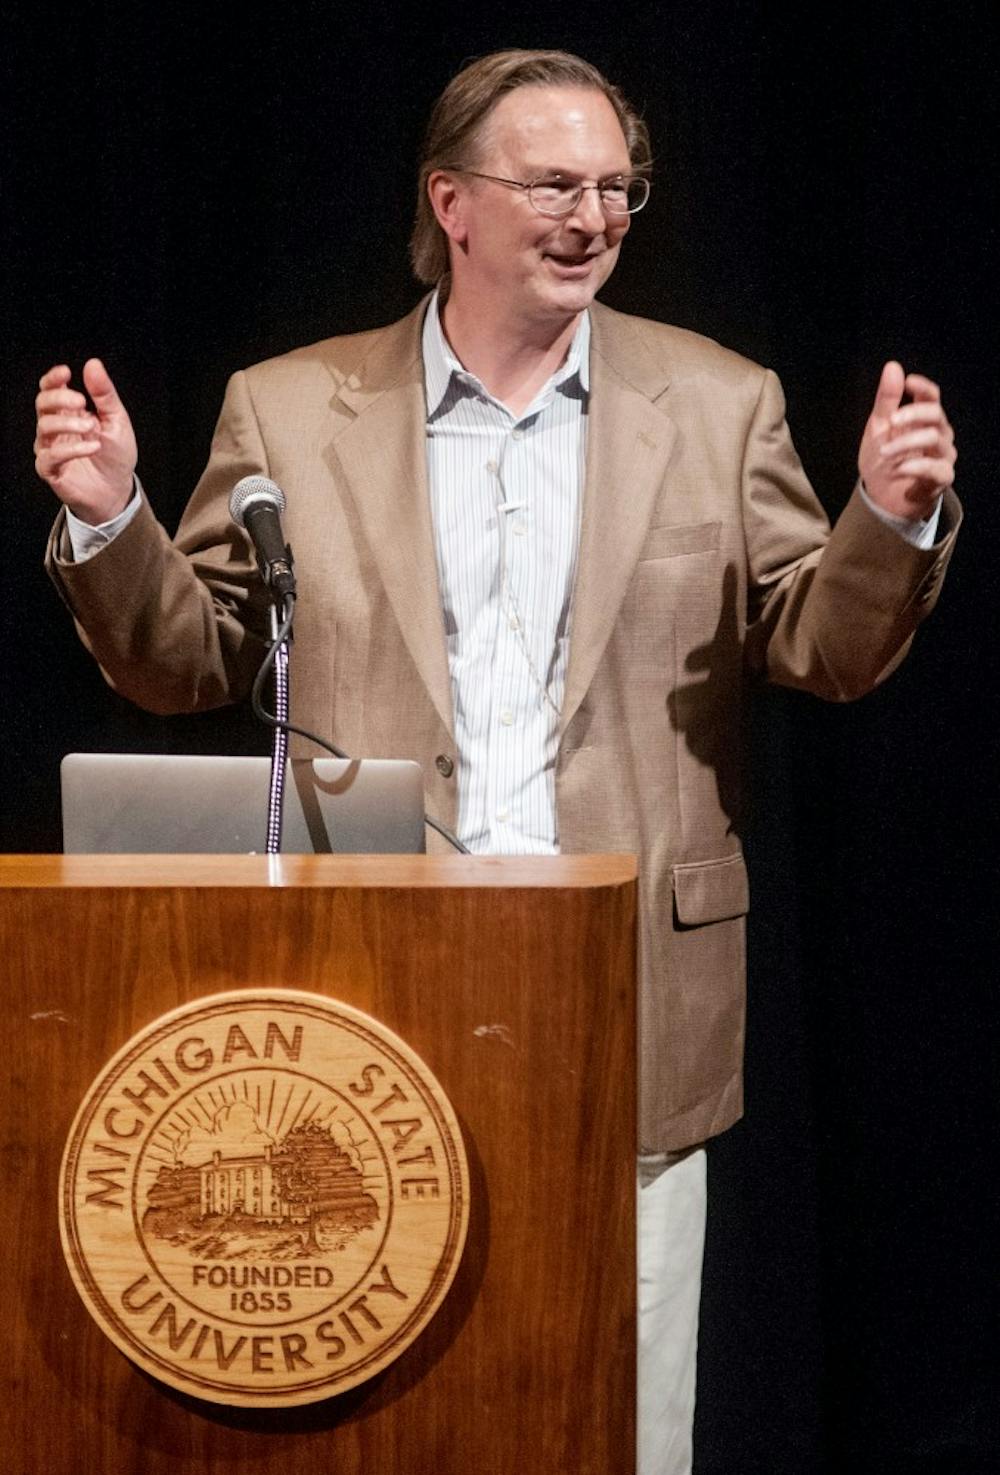 Nobel Laureate Jack Szostak speaks to the audience Thursday evening, July 19, 2012 at the Wharton Center.  Szostak spoke to the Artificial Life 13, international conference crowd on the topics of the simulation and synthesis of living things. Adam Toolin/The State News